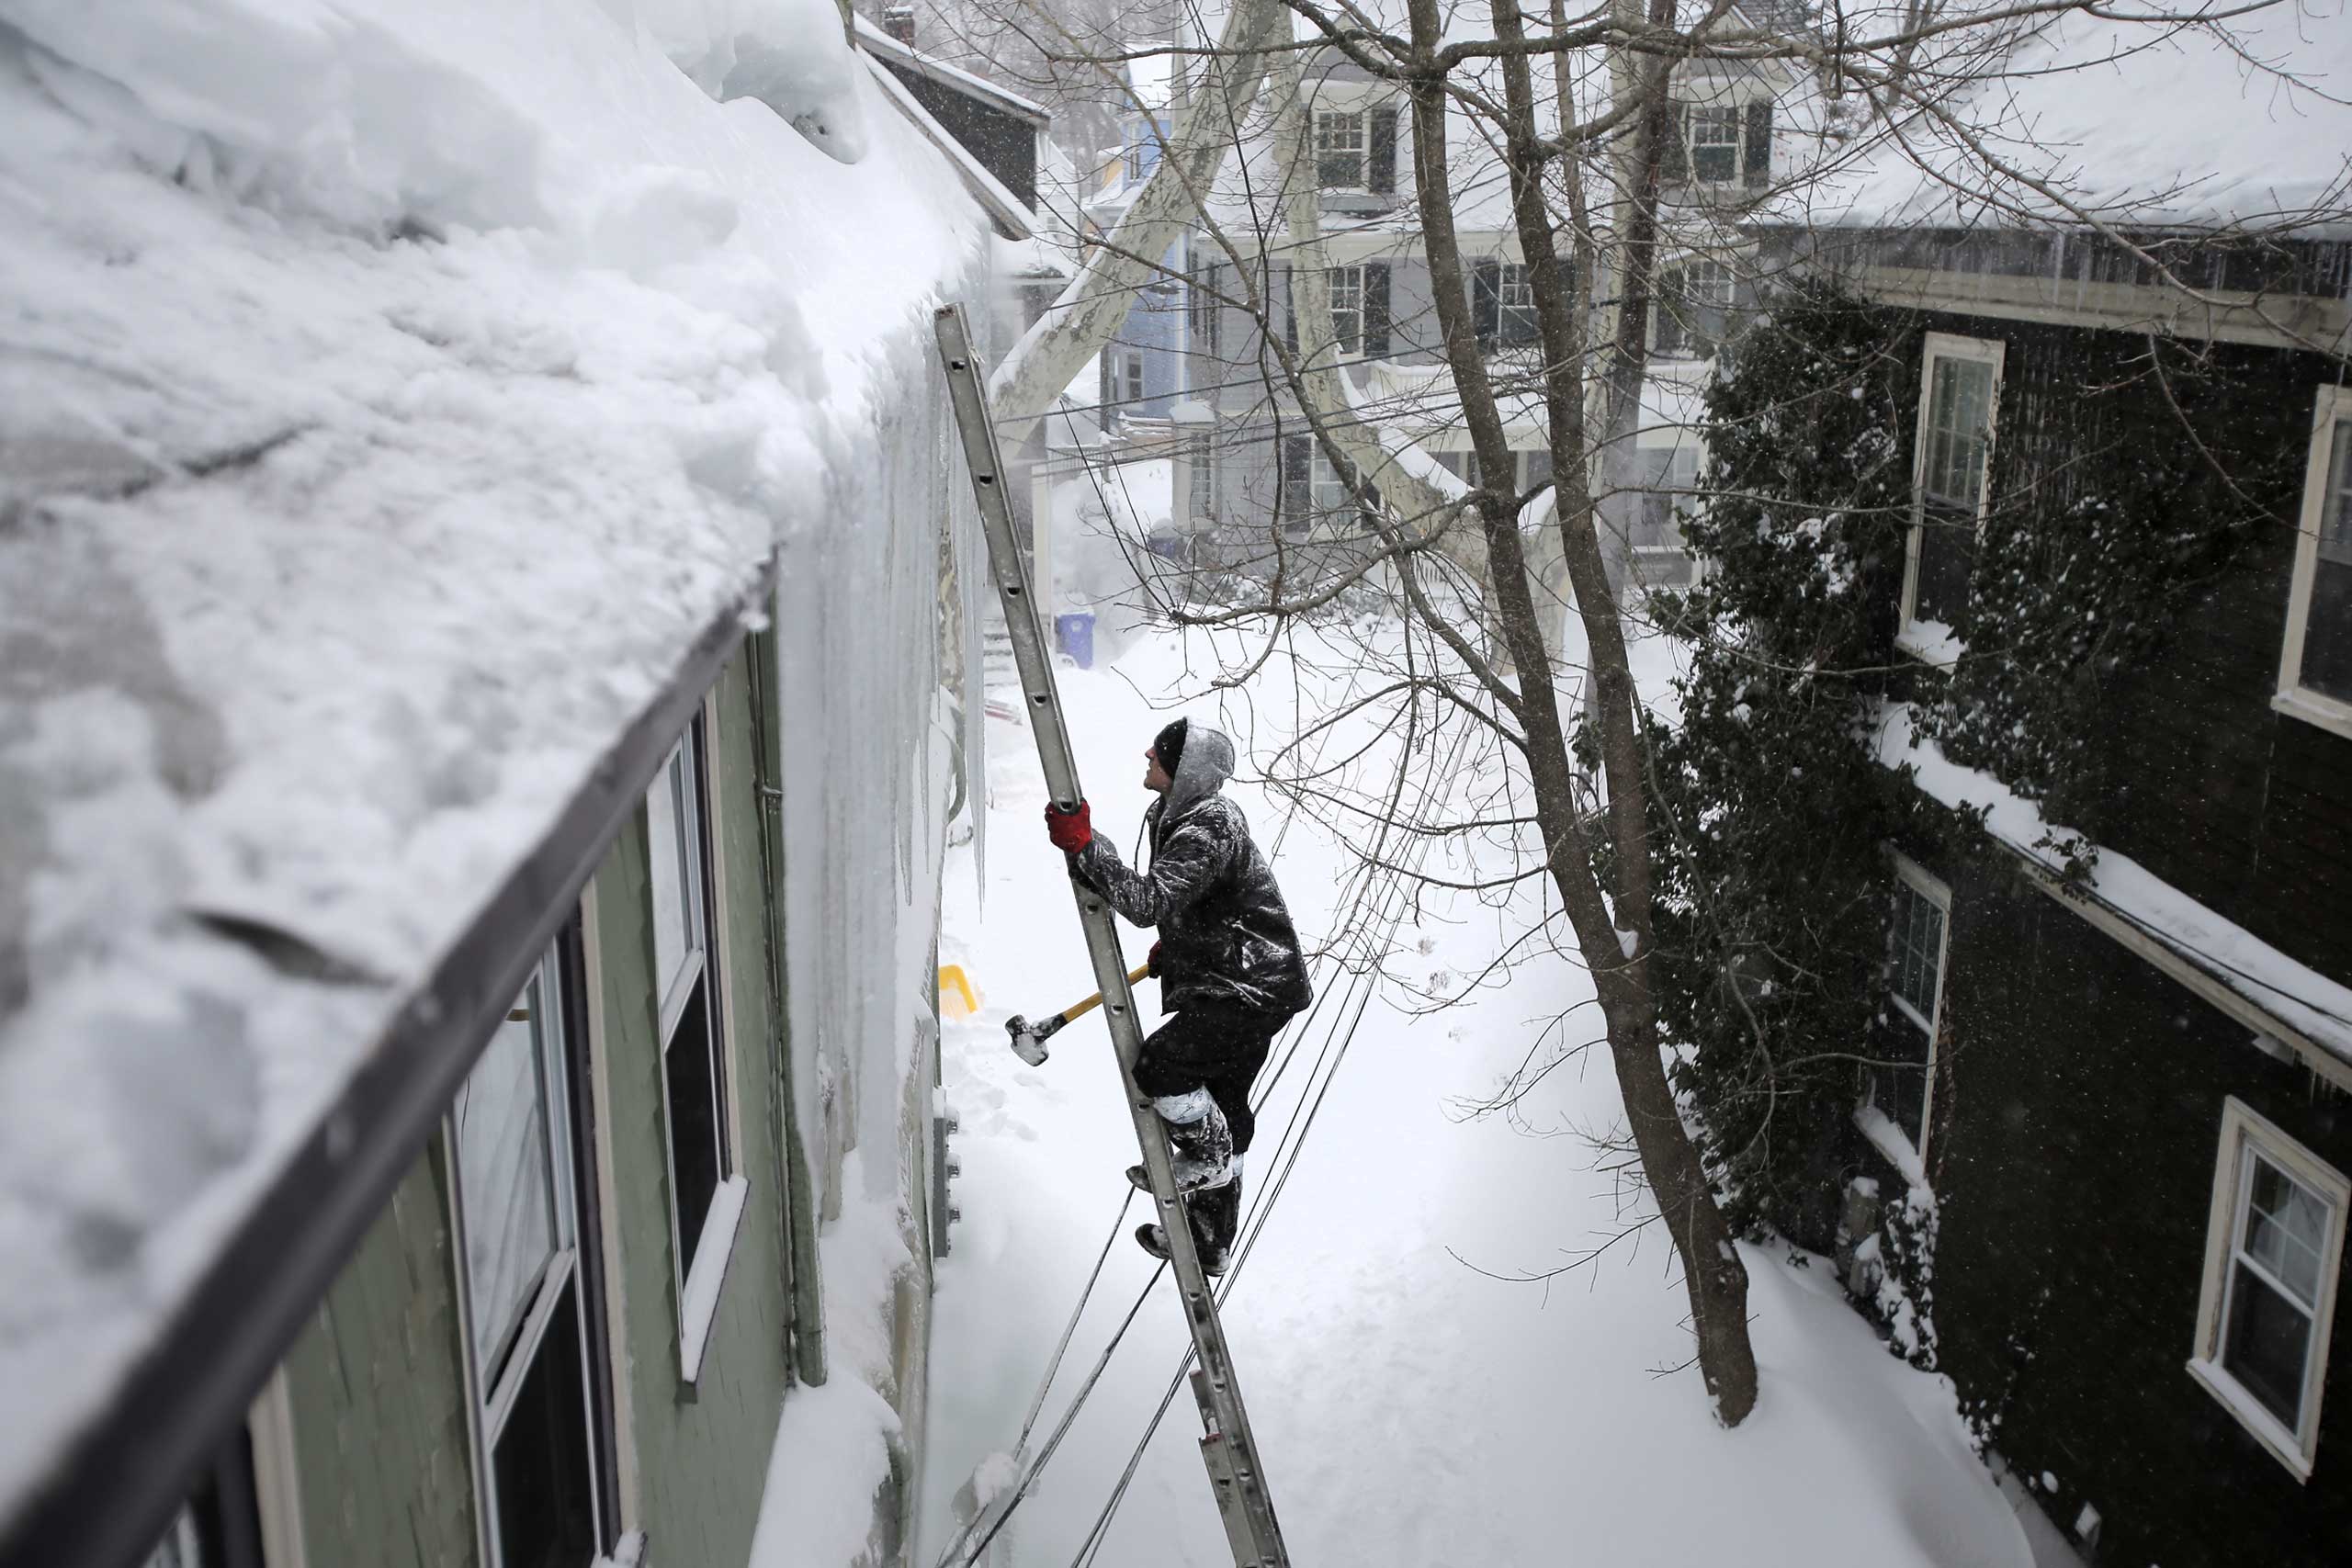 Jay Bullens Jr. of Able Roofing climbs with a sledgehammer to the third floor of a house to knock snow and ice from a roof on Beals Street in Brookline, Mass. on Feb. 9, 2015.